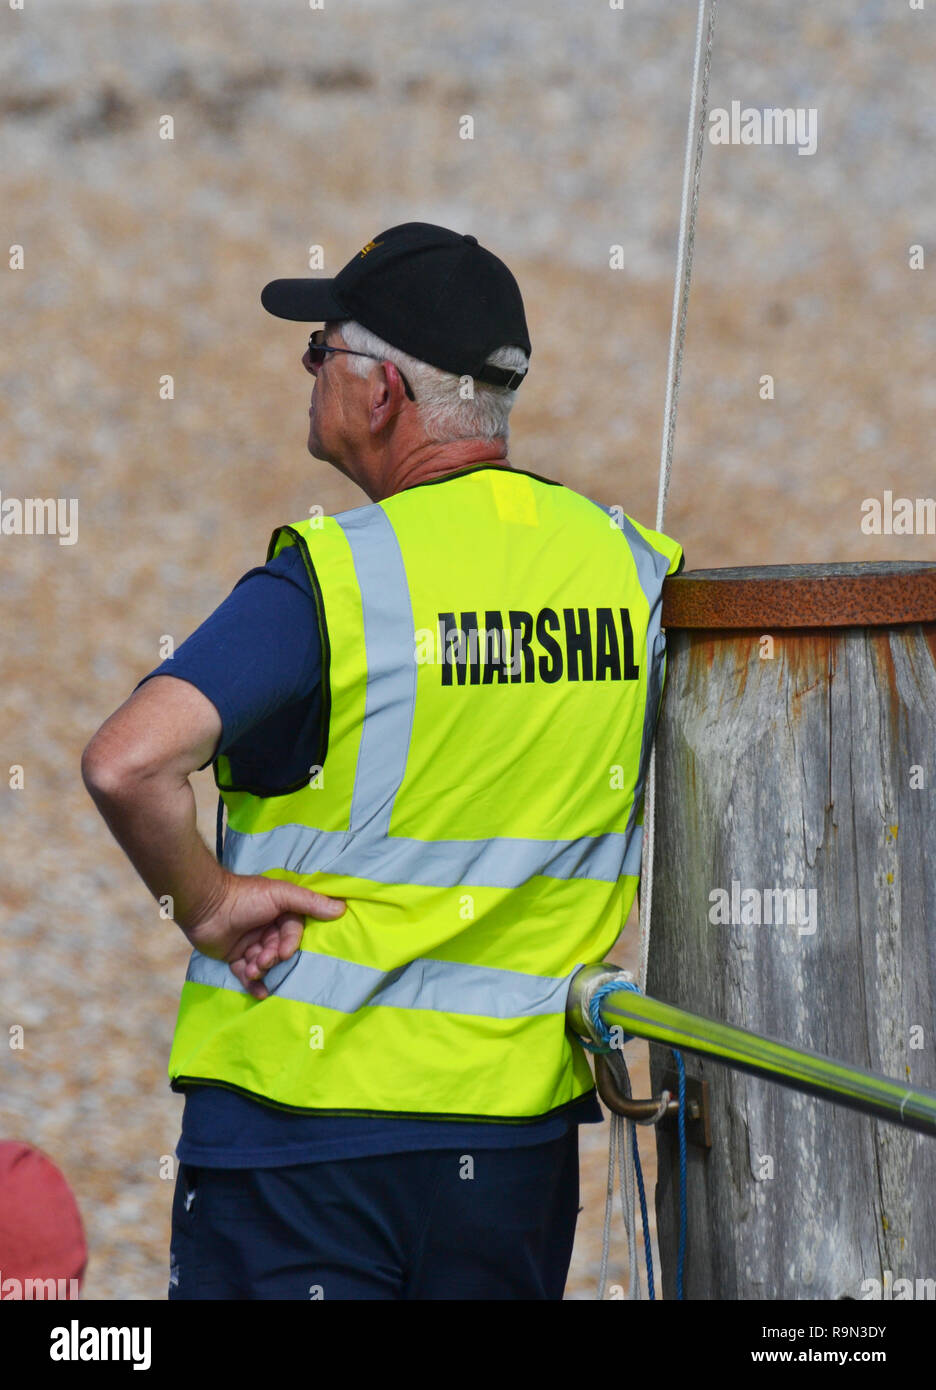 Marshall in Eastbourne Airbourne Air Show, East Sussex, England, Großbritannien Stockfoto